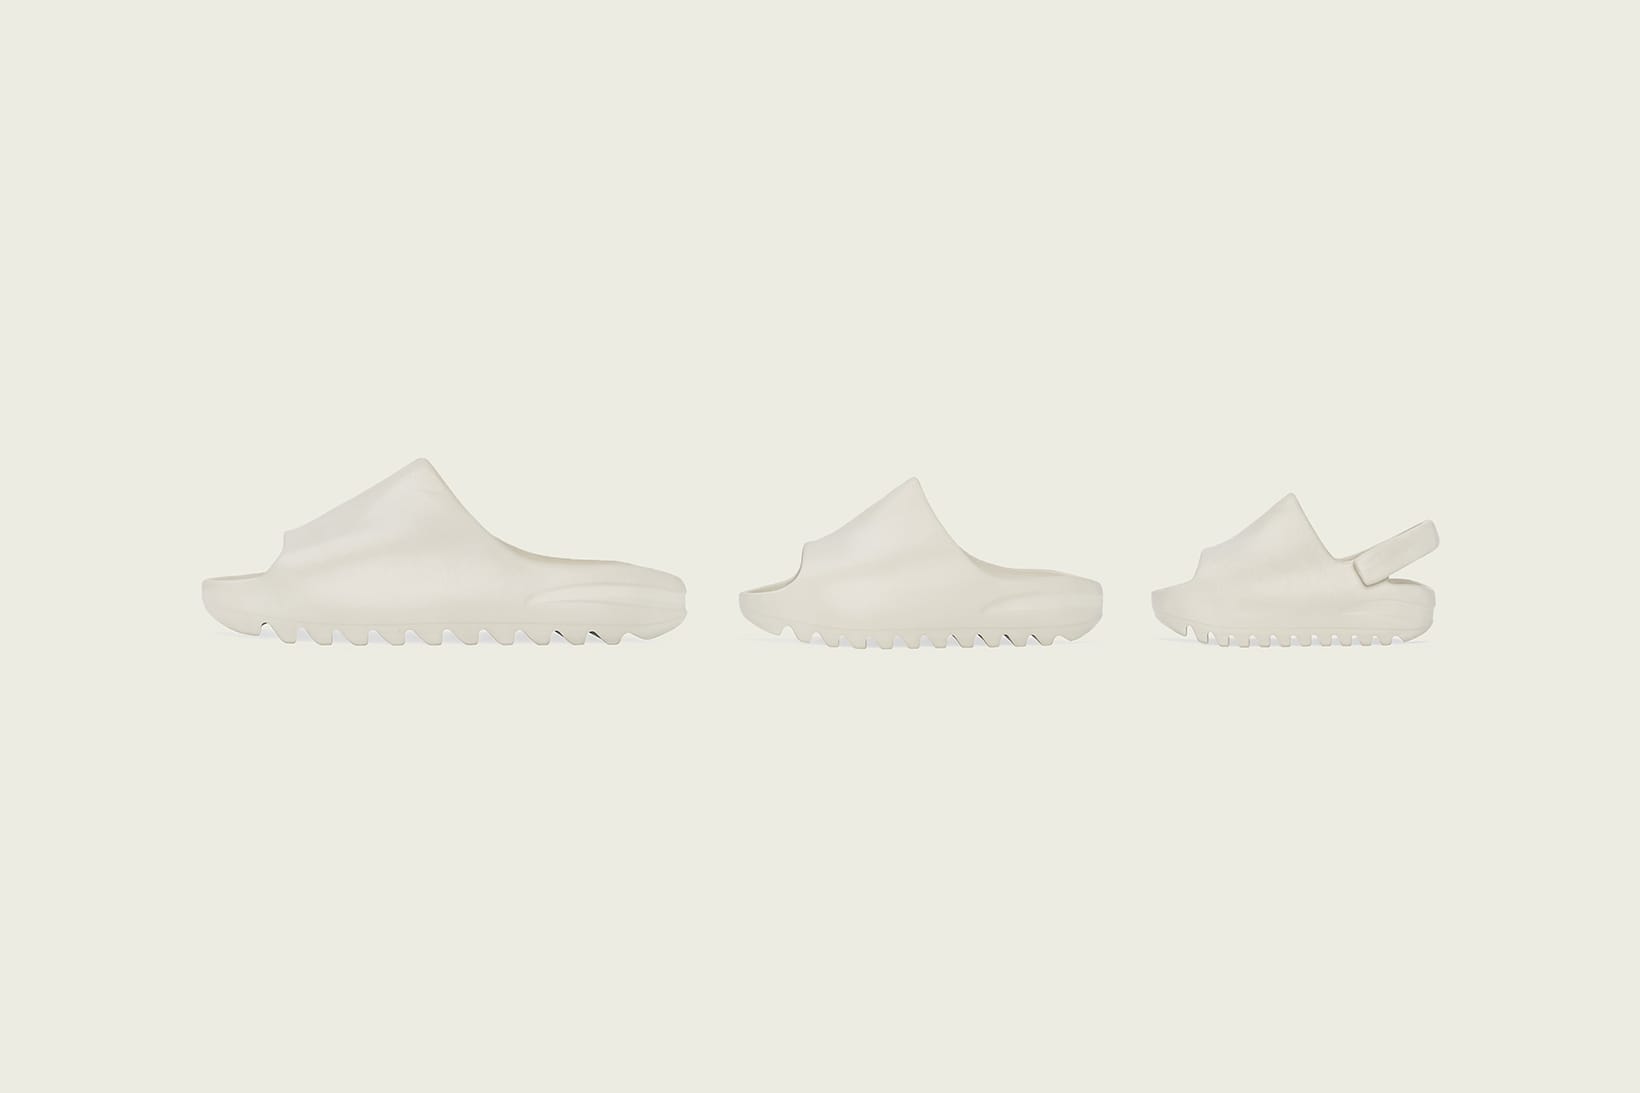 Full Adidas Offer Images For Business Free Yeezy Slides Tweet On.